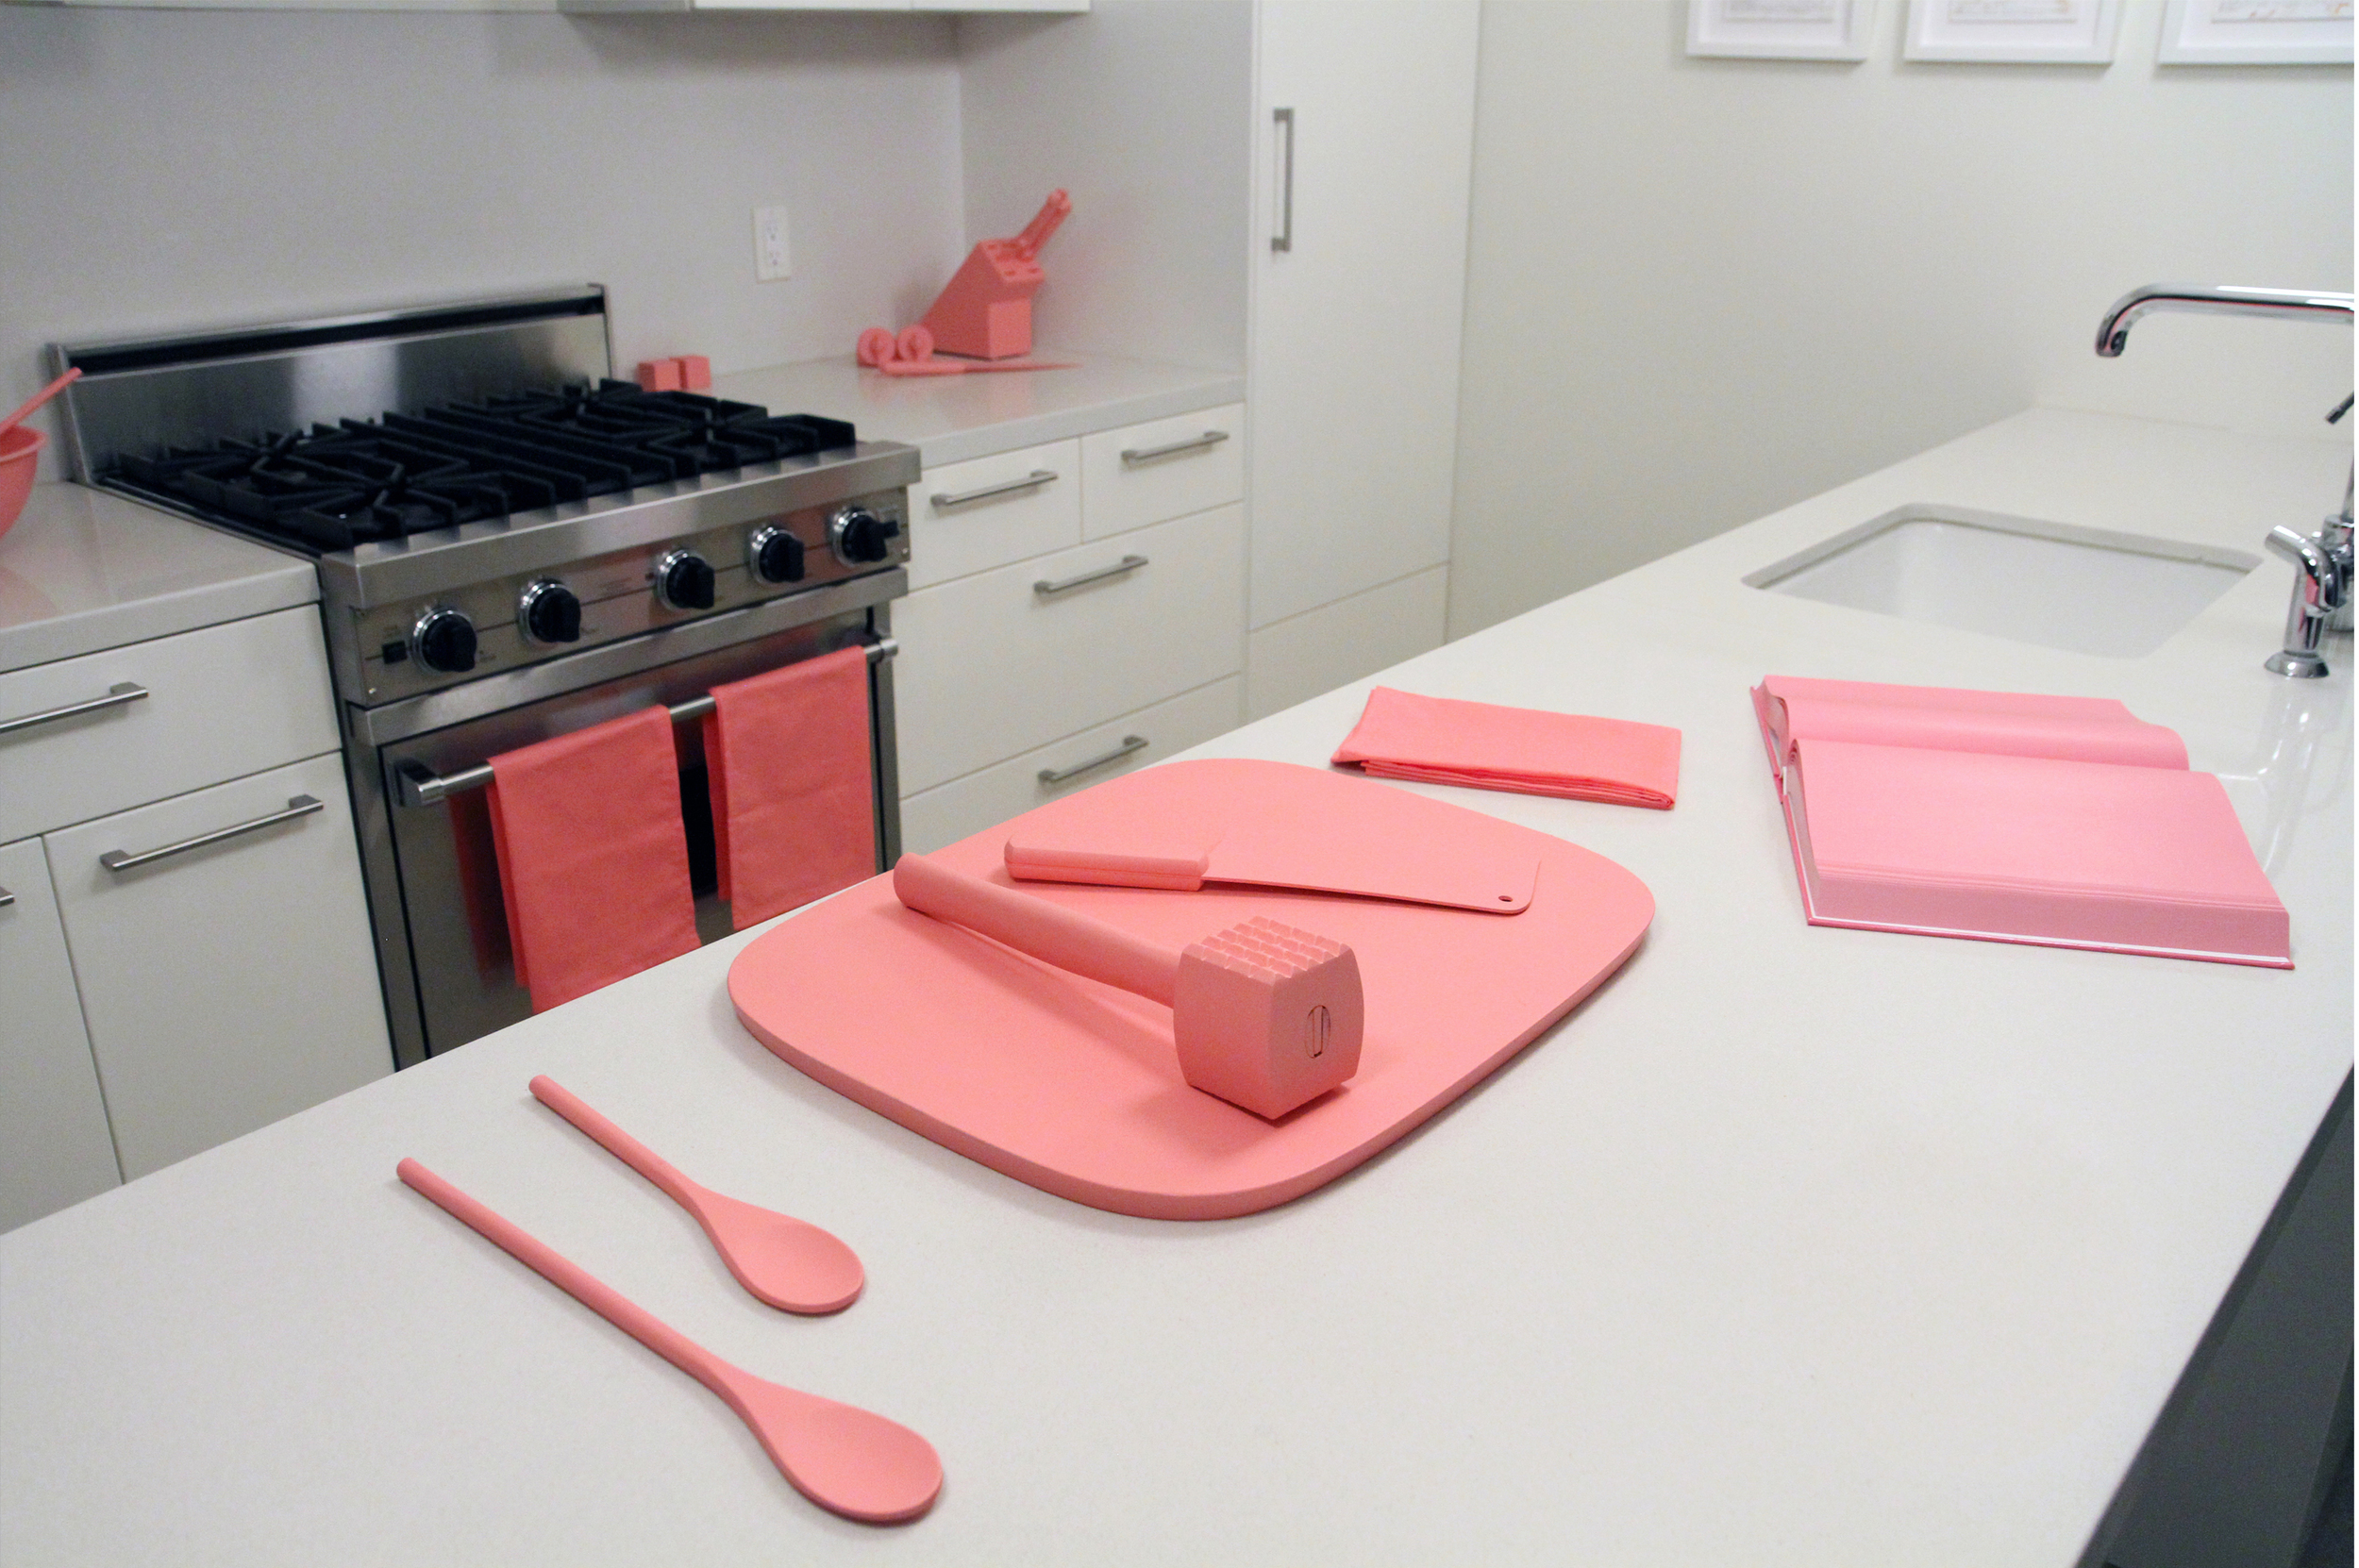   The Schauss Kitchen  Baker-Miller Pink painted kitchen objects, fabric, Baker-Miller Pink "cookbook" Installation dimensions variable Marine Contemporary Art Salon, Venice, CA. 2013 Photo Courtesy of Sean Flaherty 